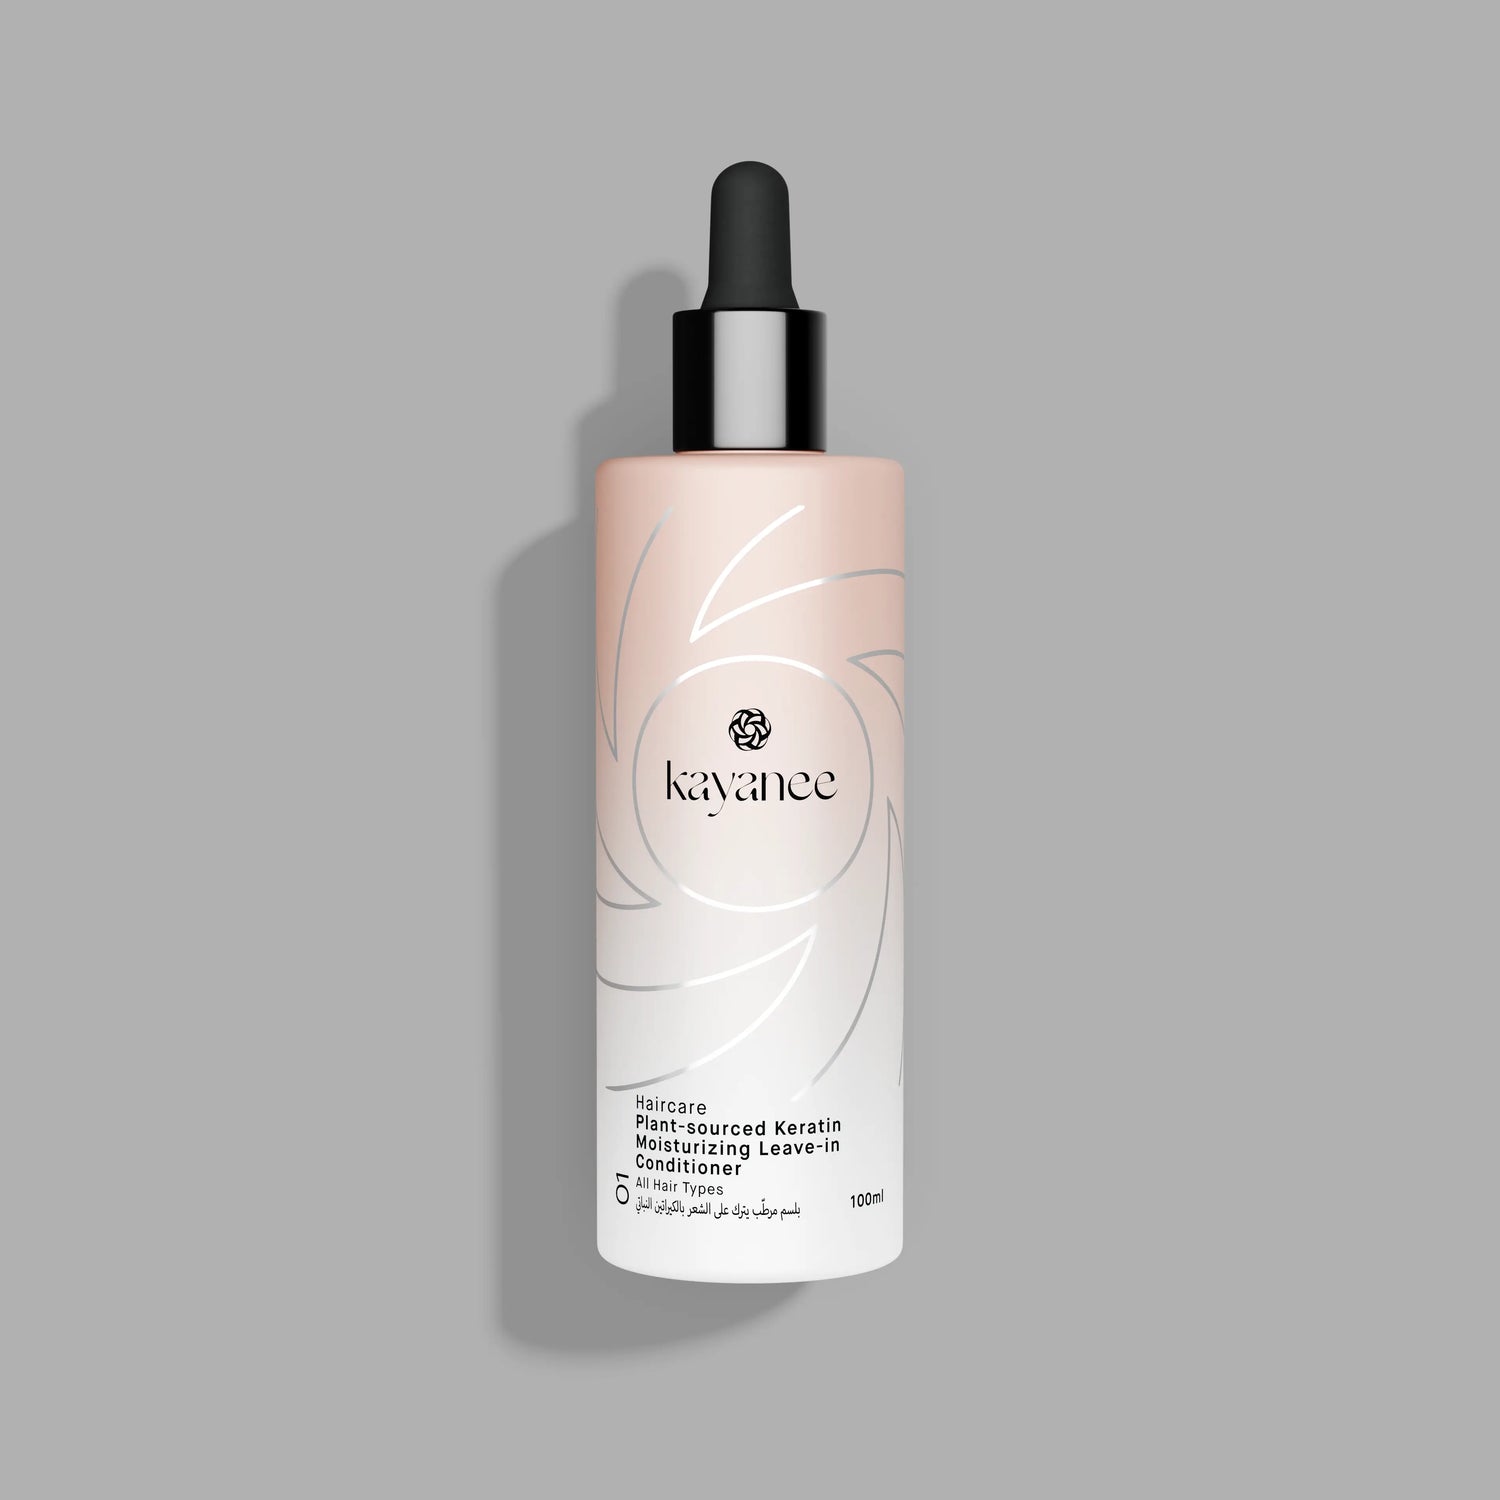 Plant-sourced Keratin Moisturizing Leave-in Conditioner